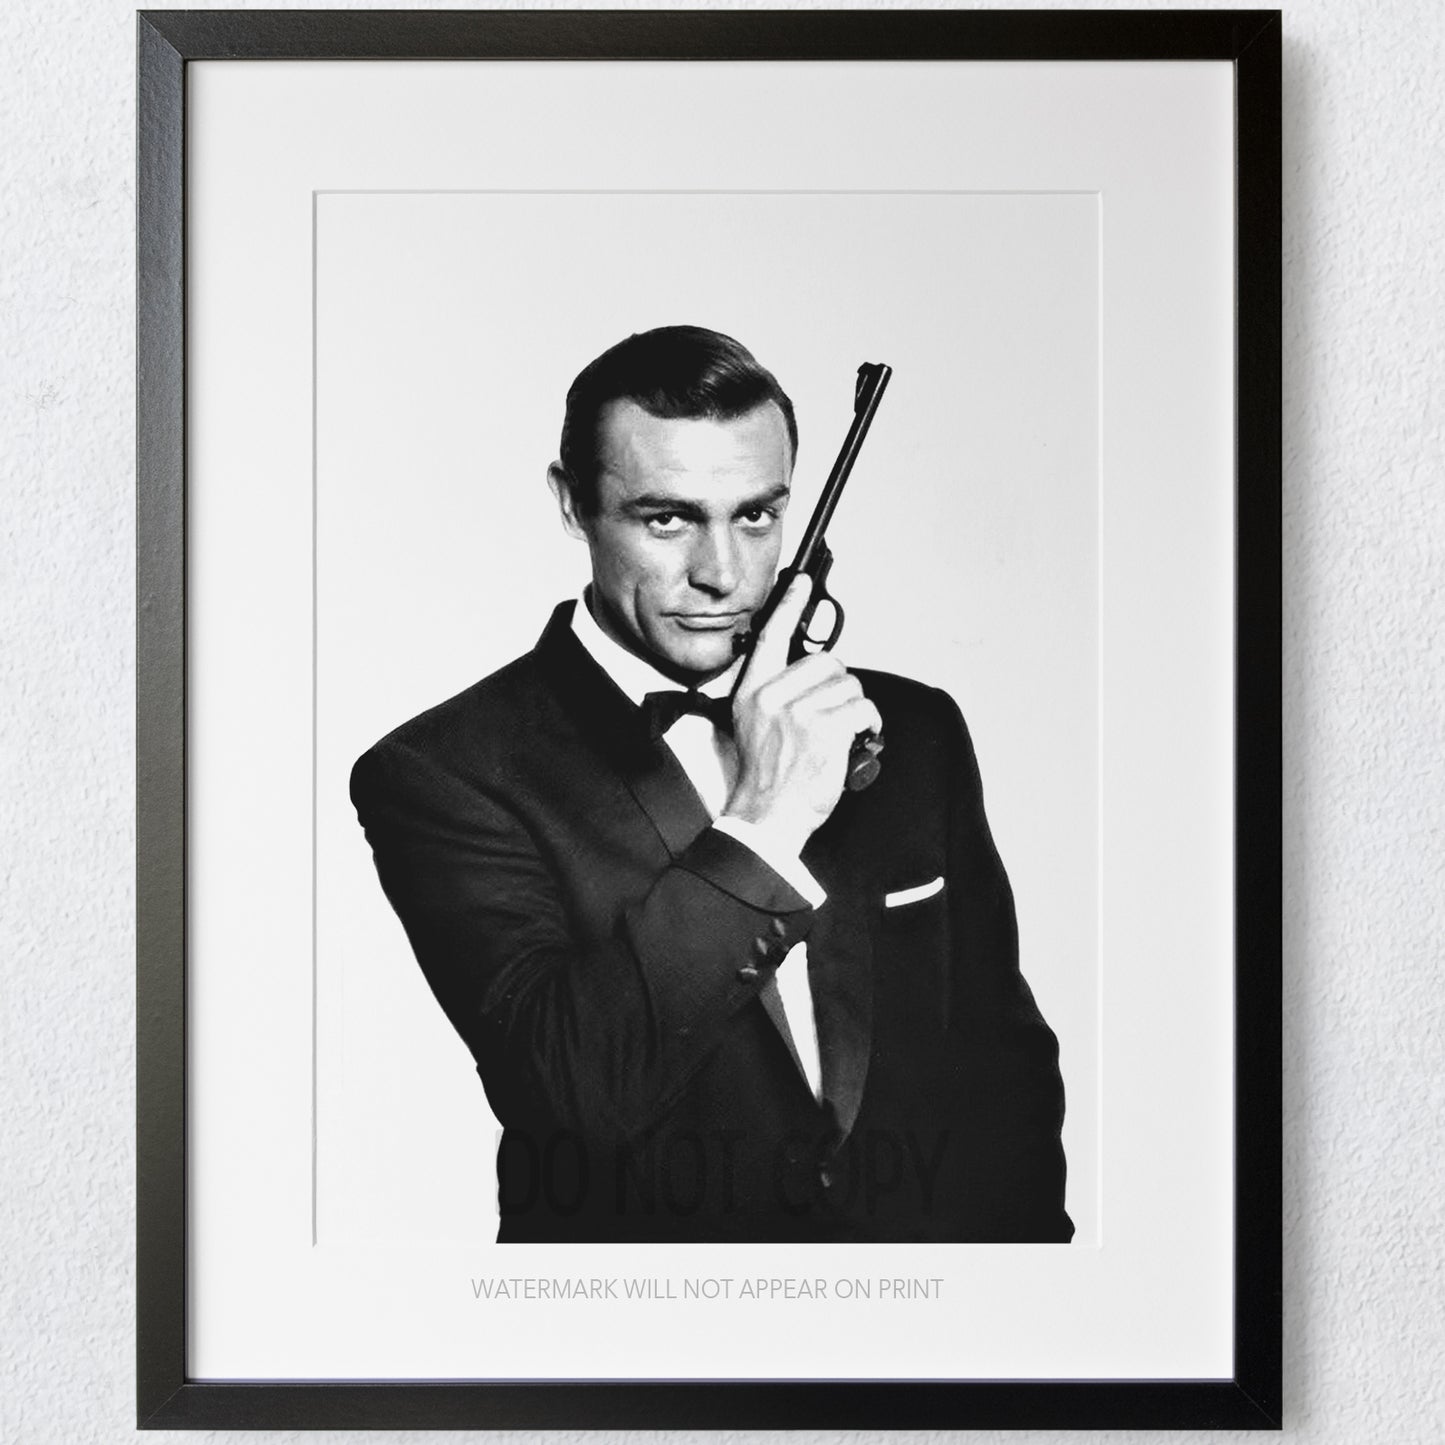 Sean Connery as James Bond with Pistol